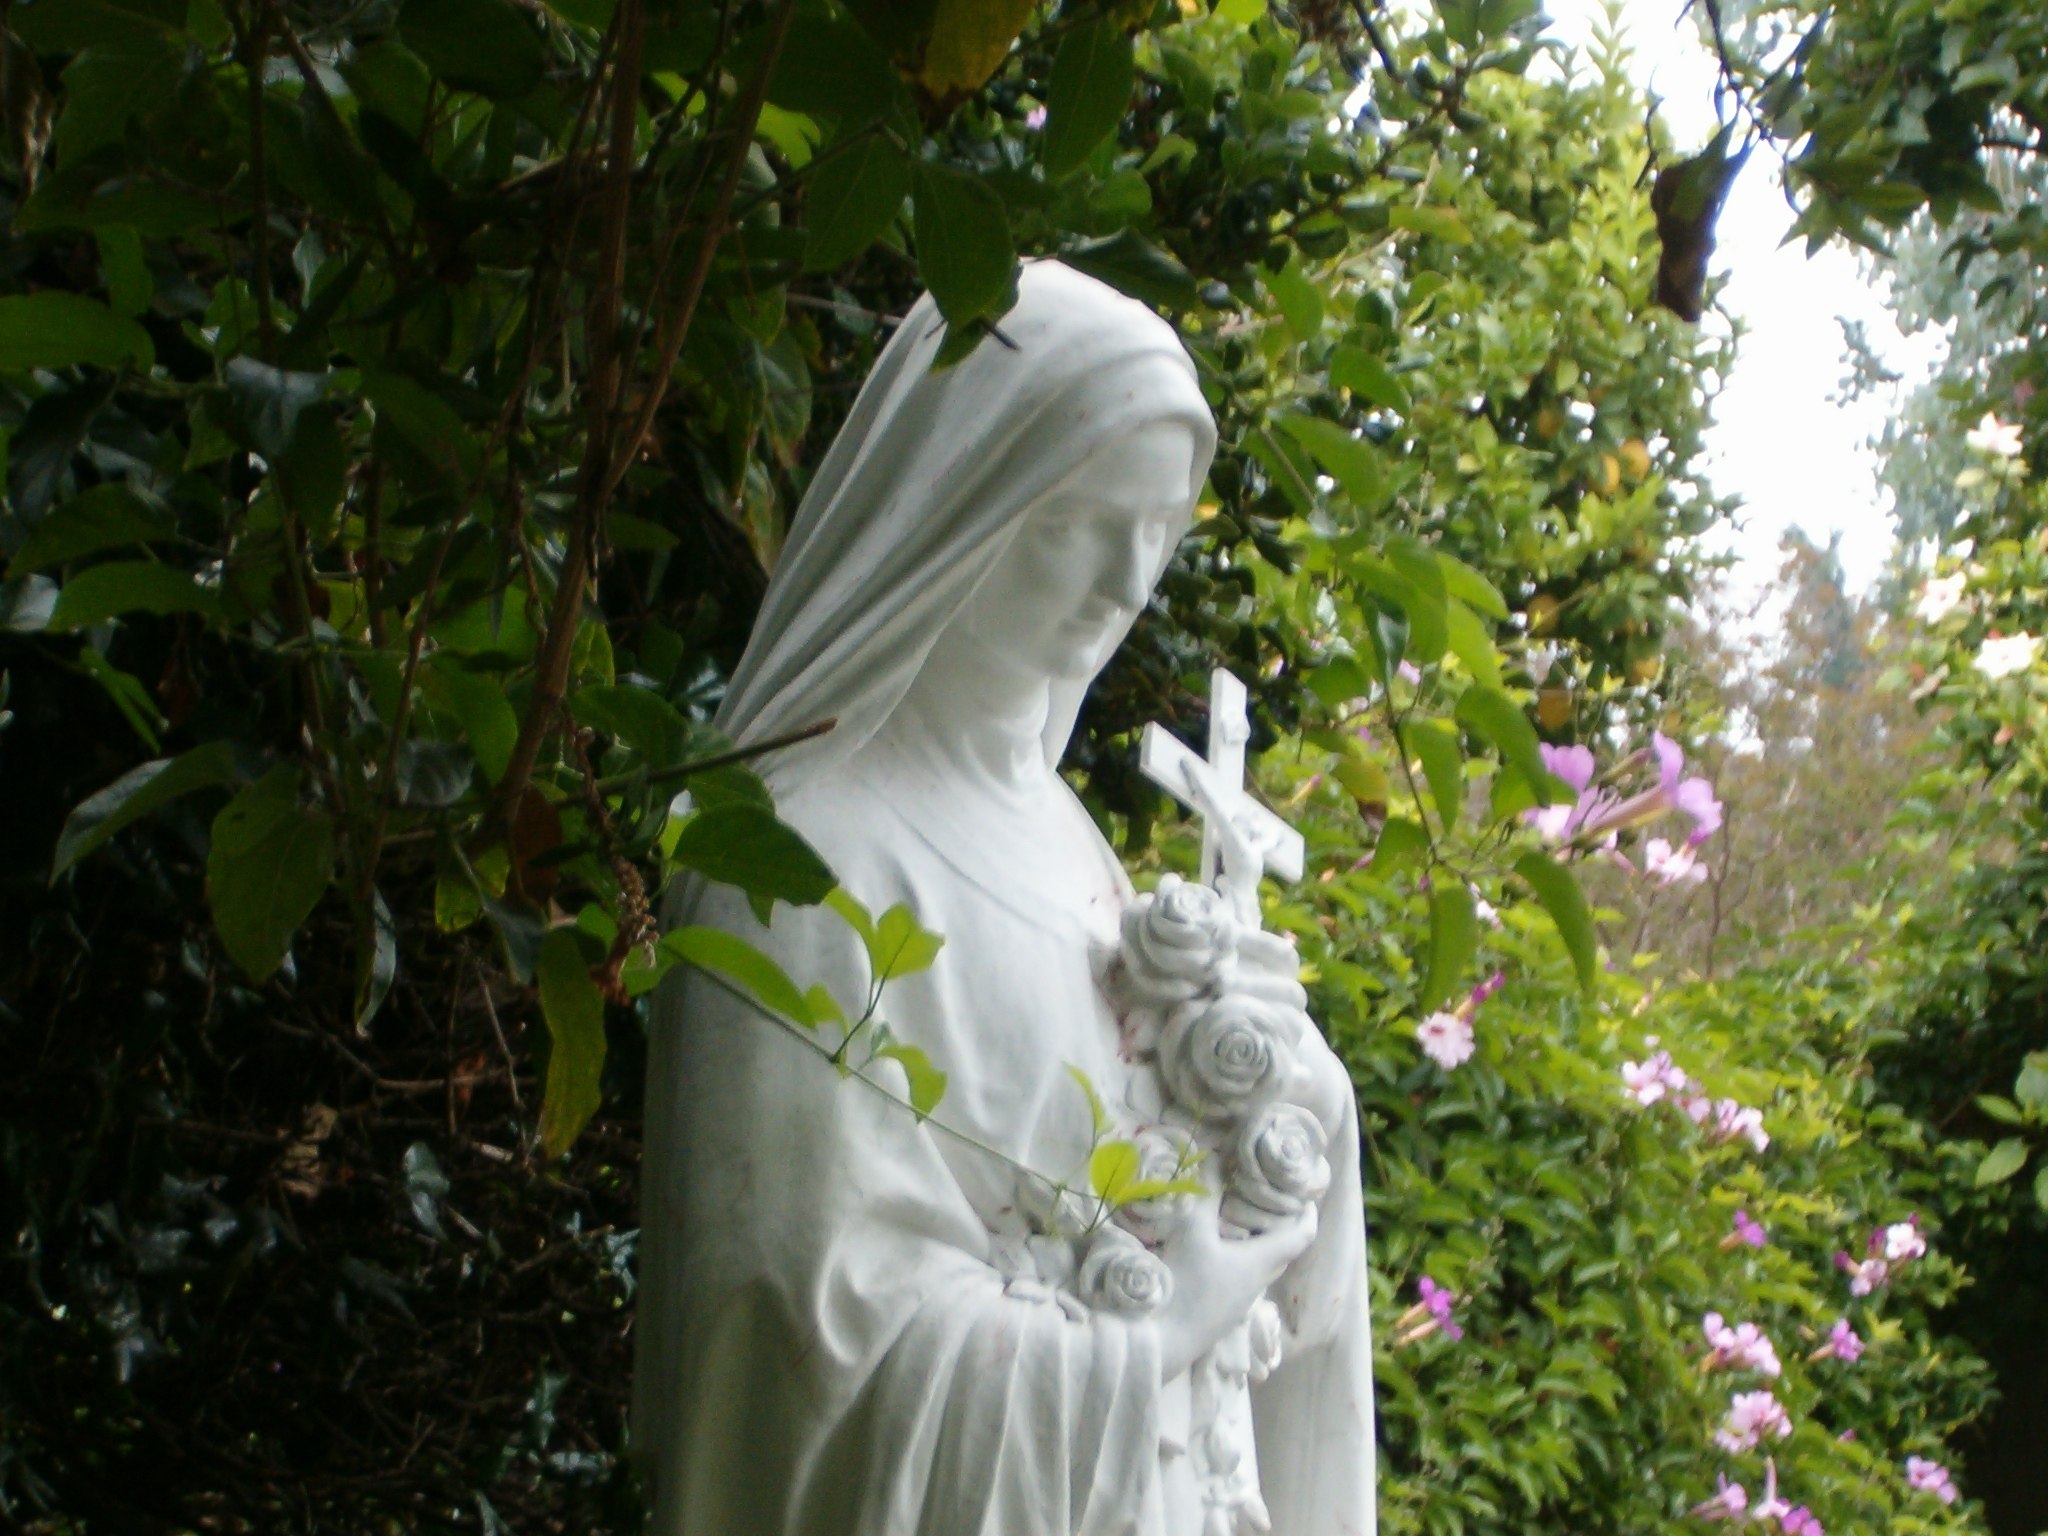 Statue of St. Therese in nature